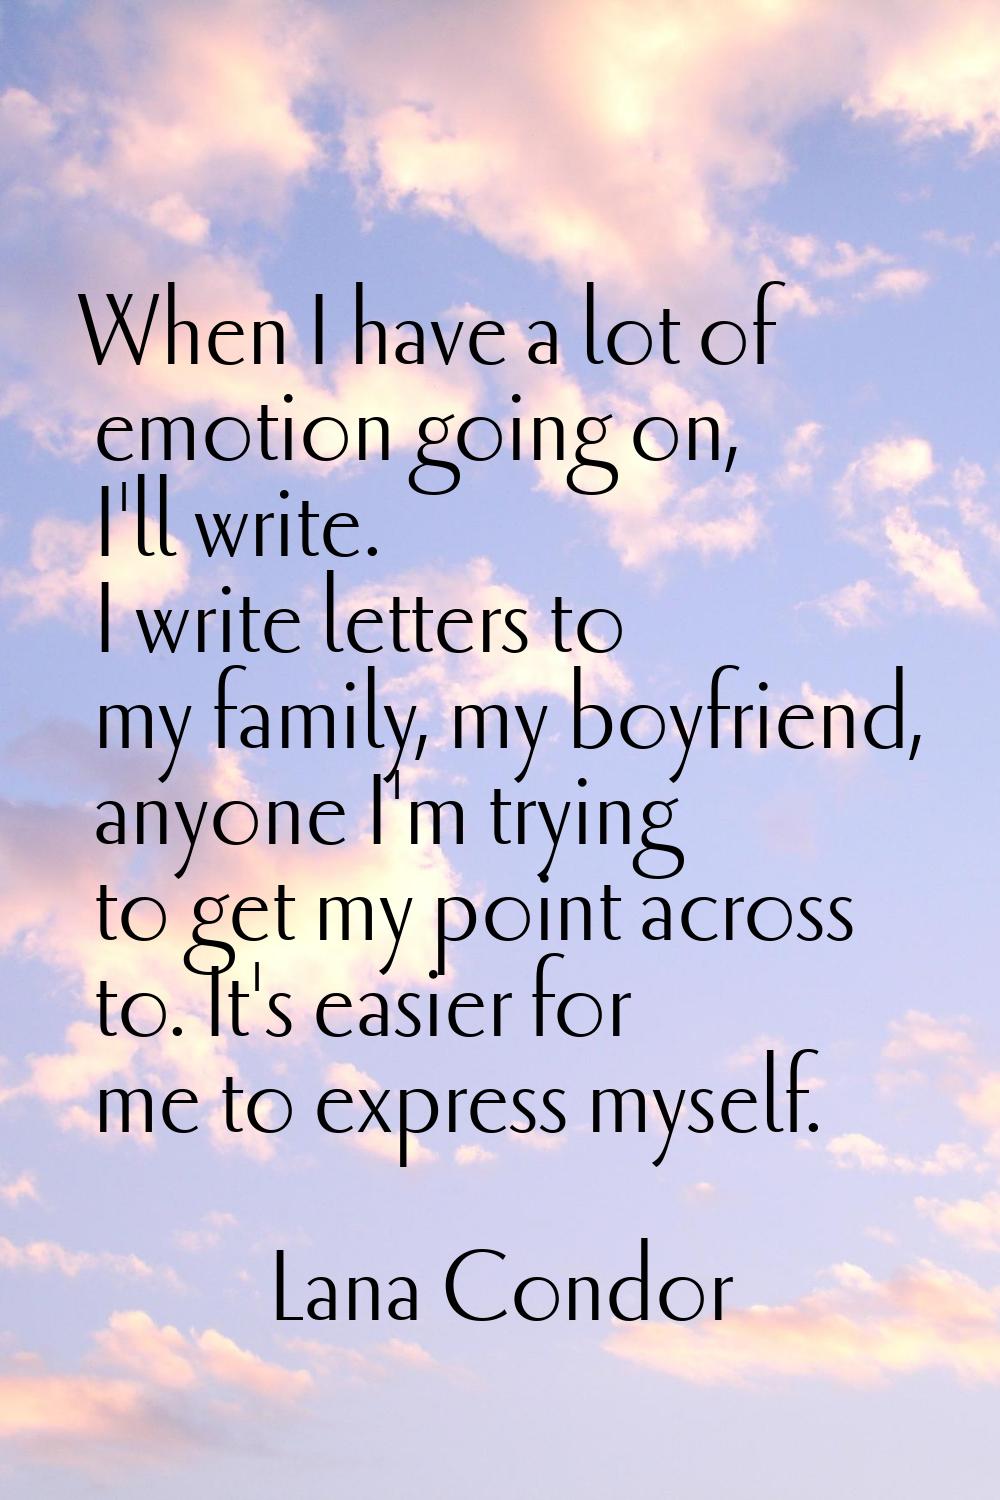 When I have a lot of emotion going on, I'll write. I write letters to my family, my boyfriend, anyo